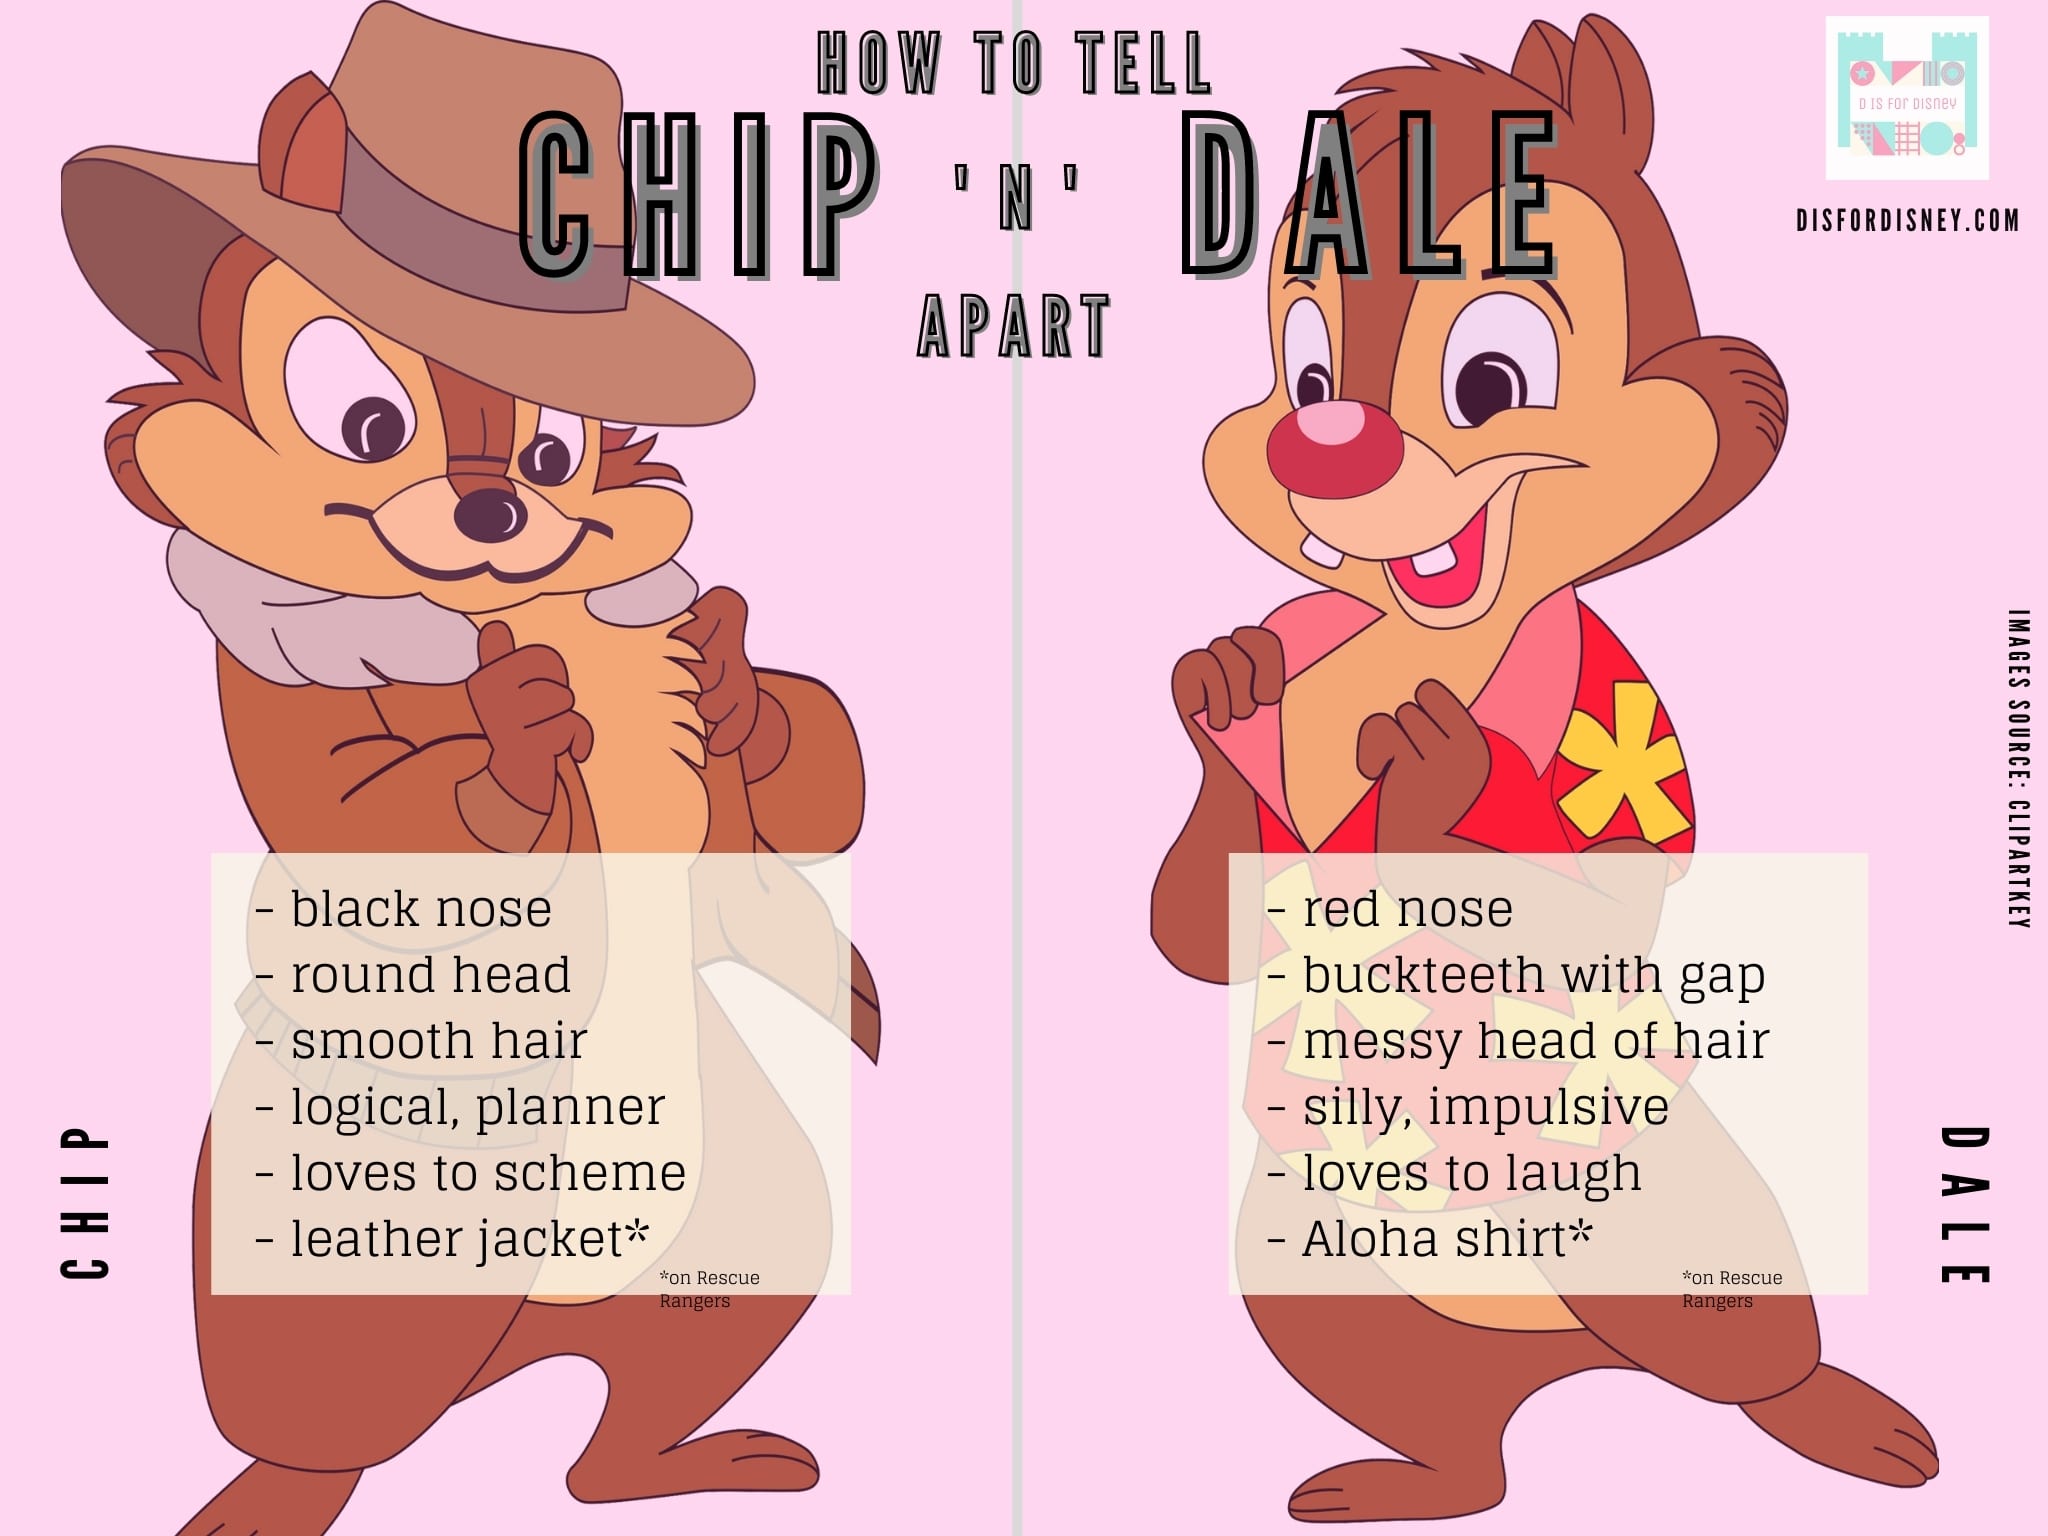 Who Has A Red Nose Chip Or Dale - KibrisPDR